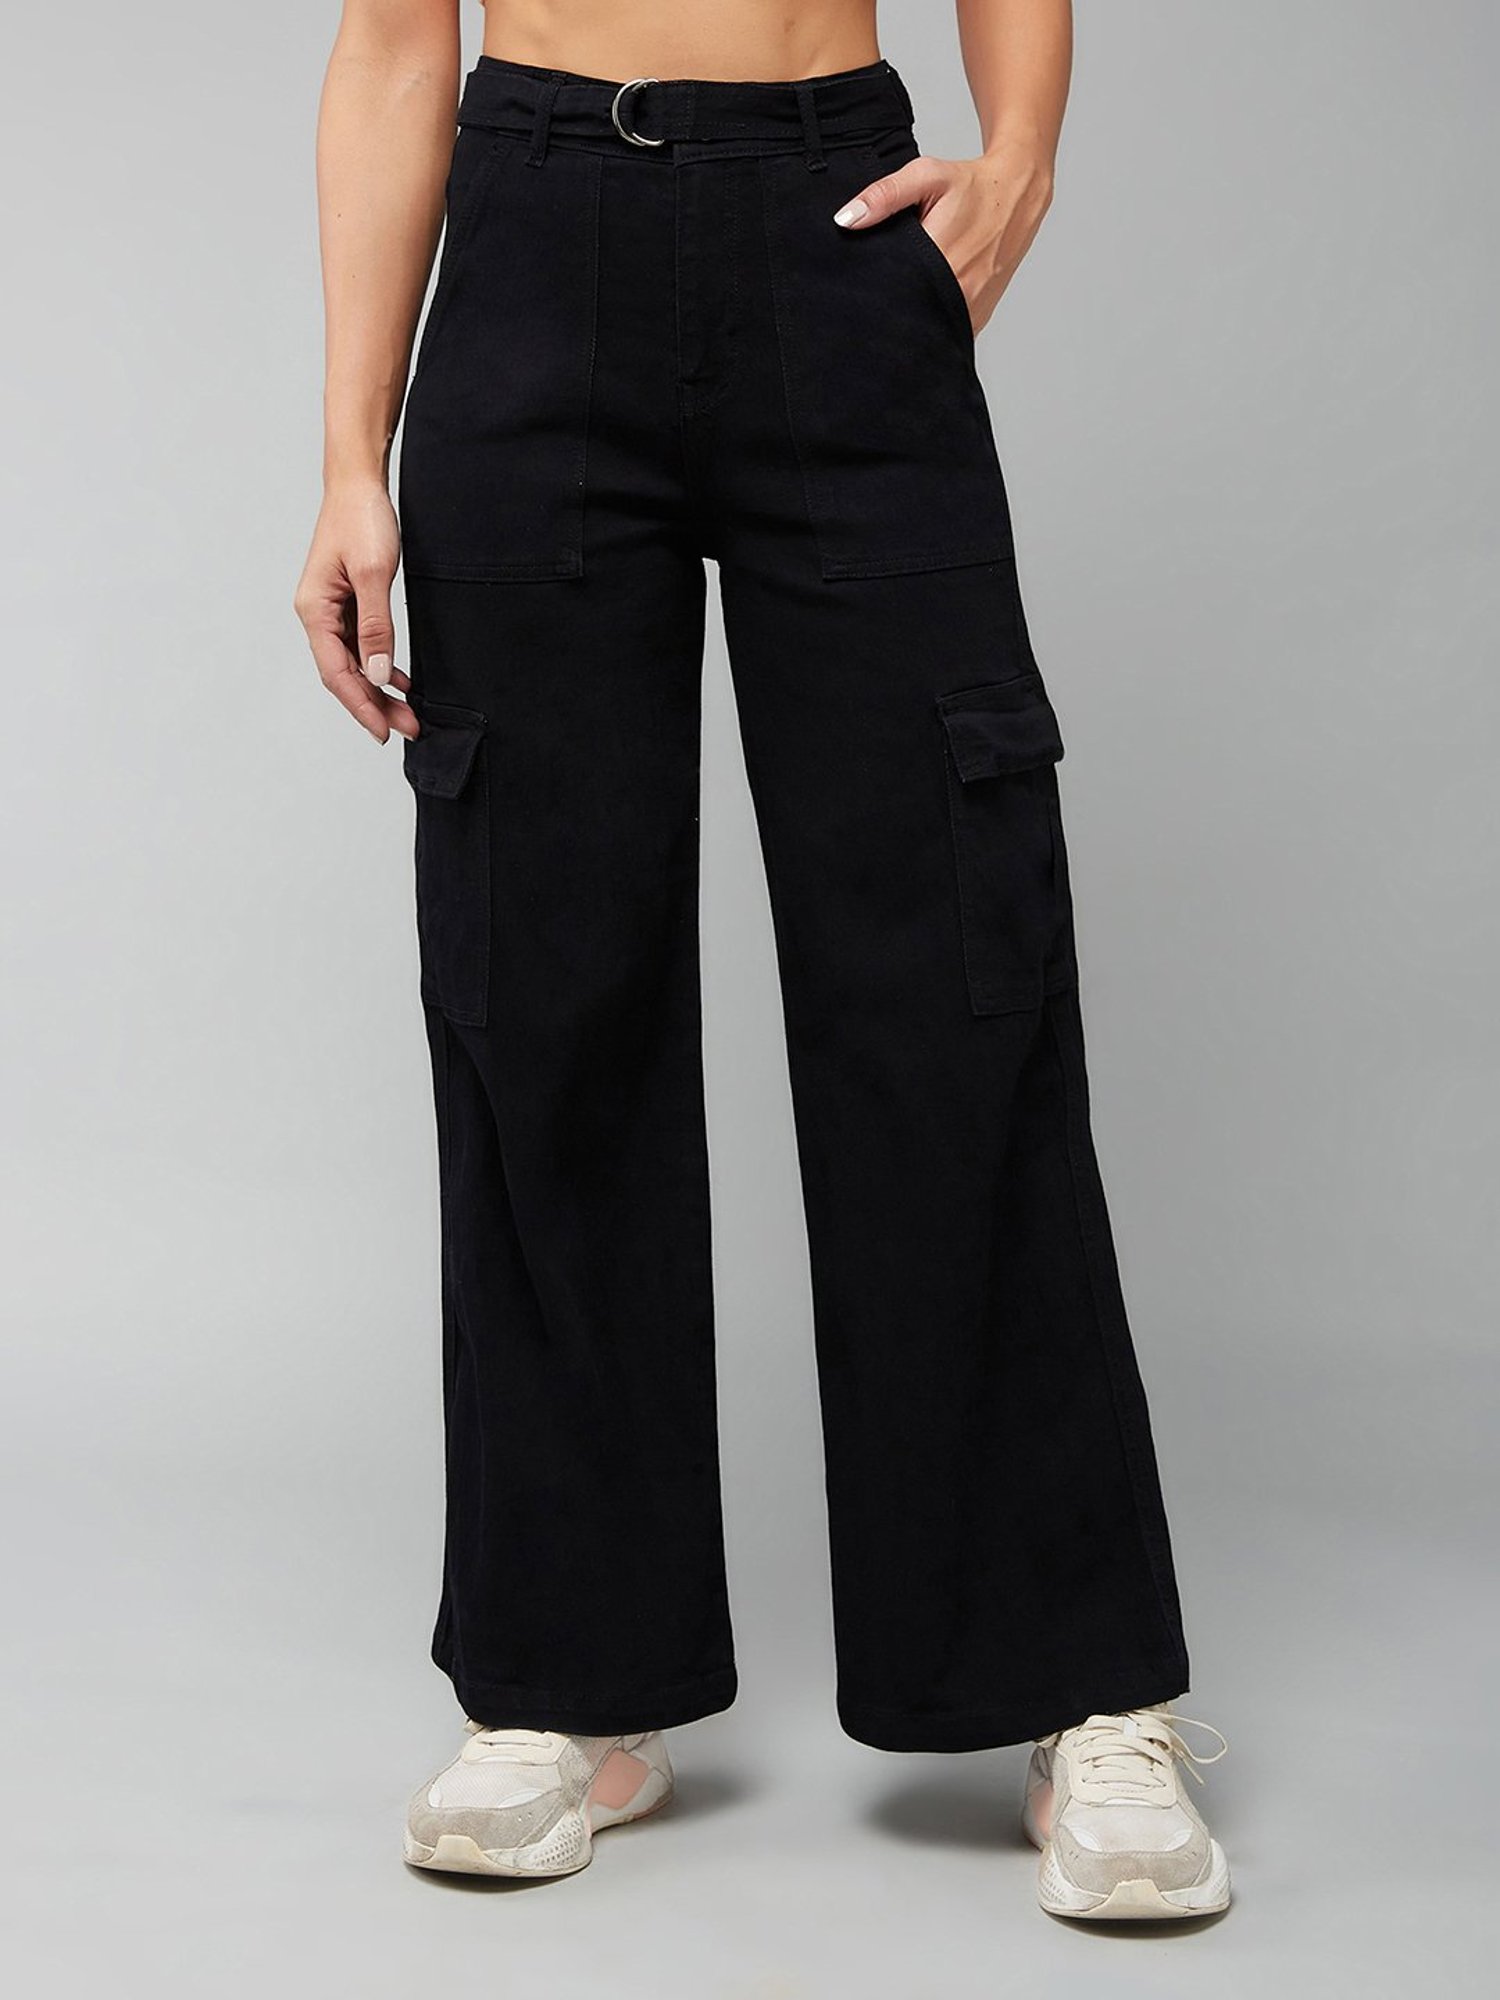 Buy DOLCE CRUDO Solid Denim Relaxed Fit Women's Casual Pants